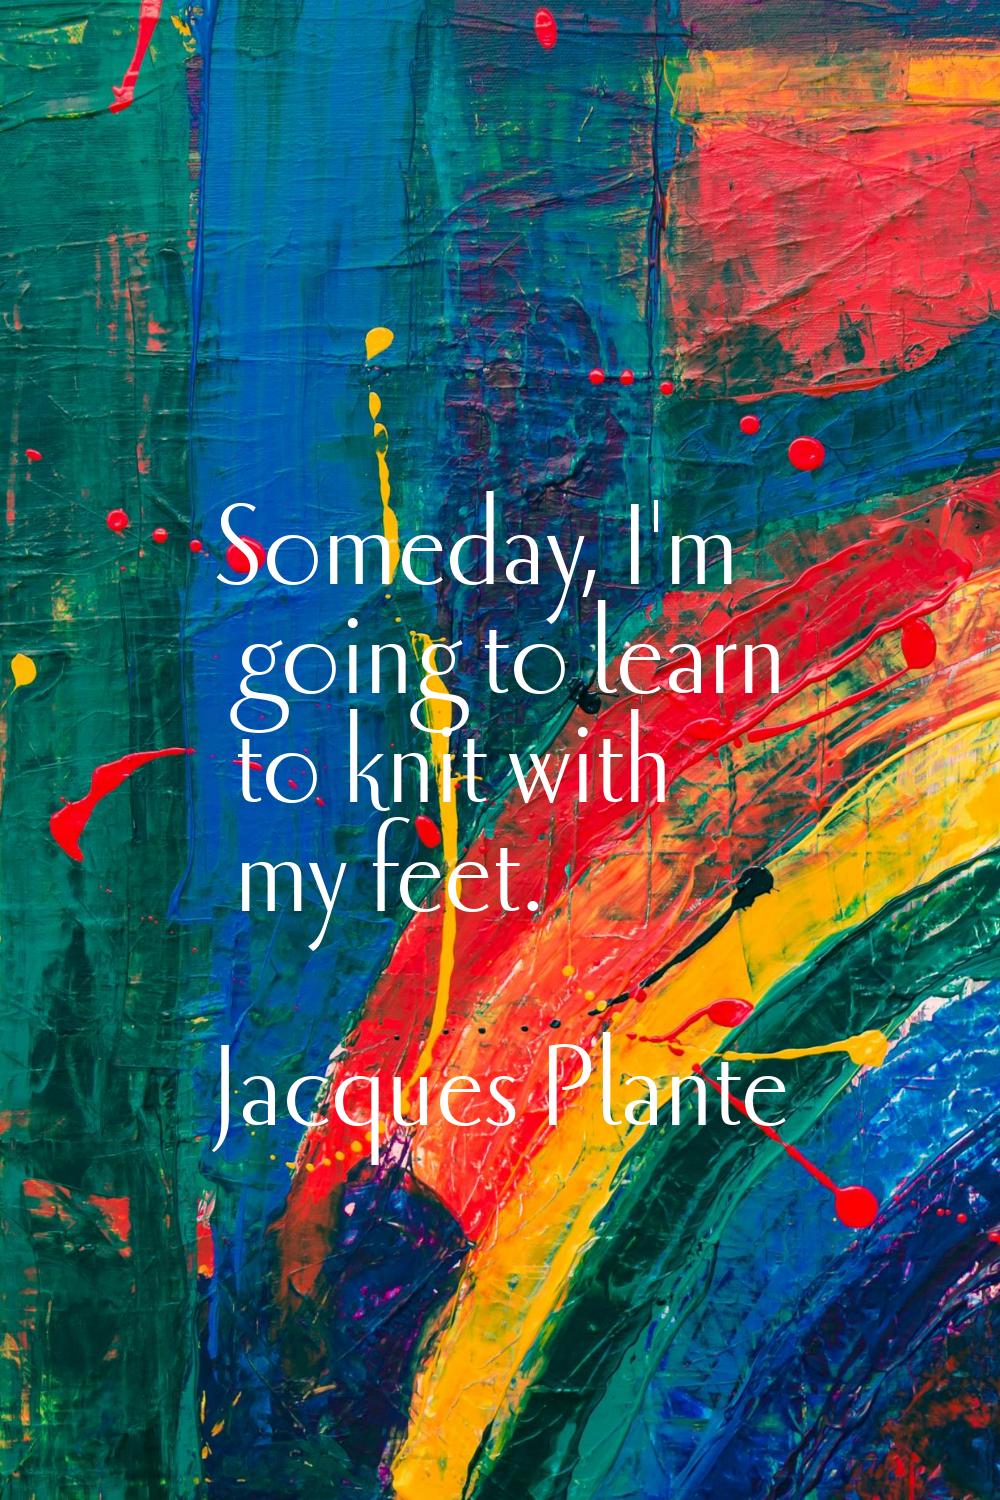 Someday, I'm going to learn to knit with my feet.